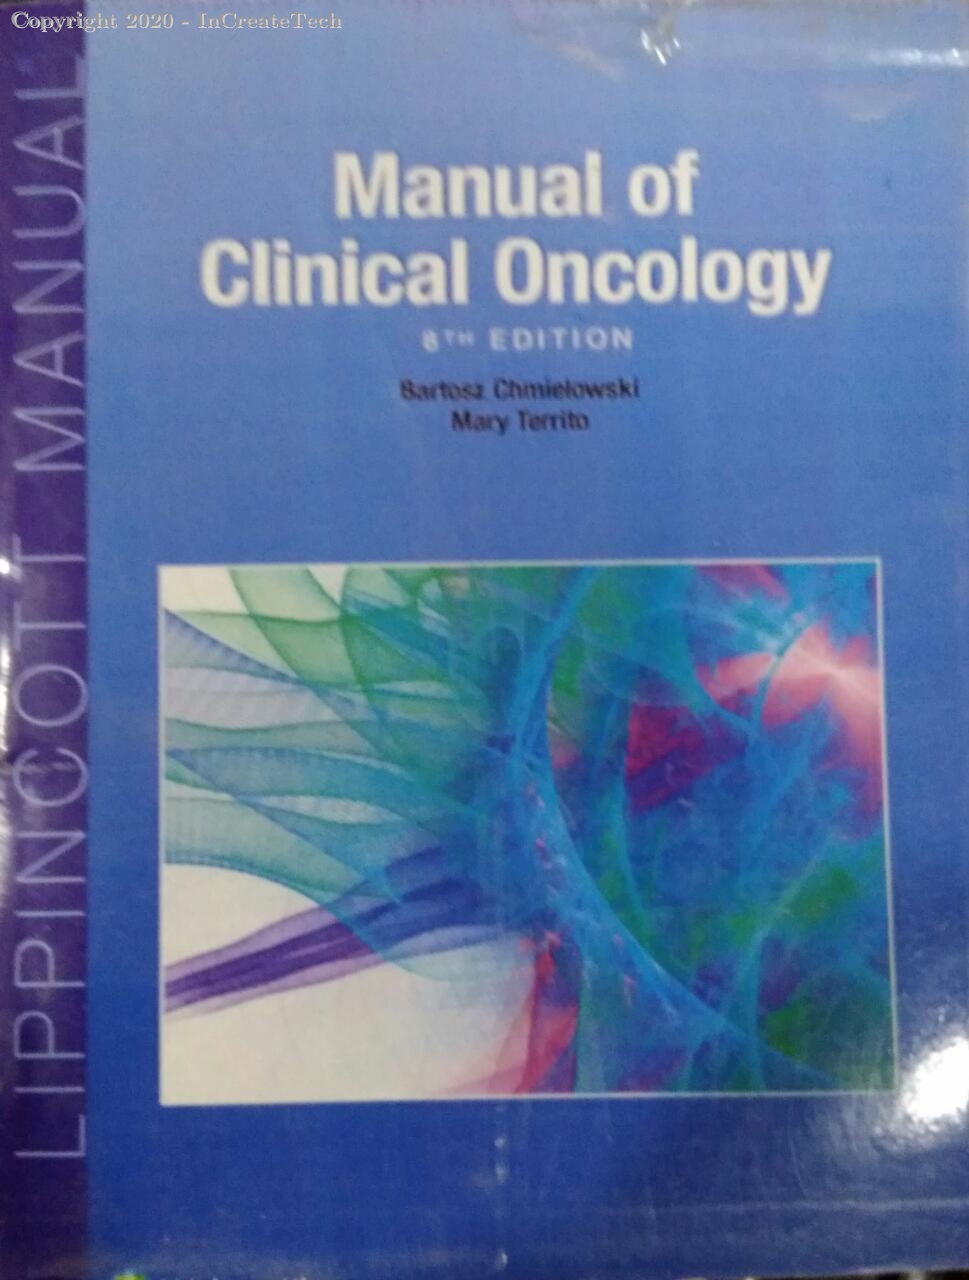 Manual of Clinical Oncology,8E 2 vol set